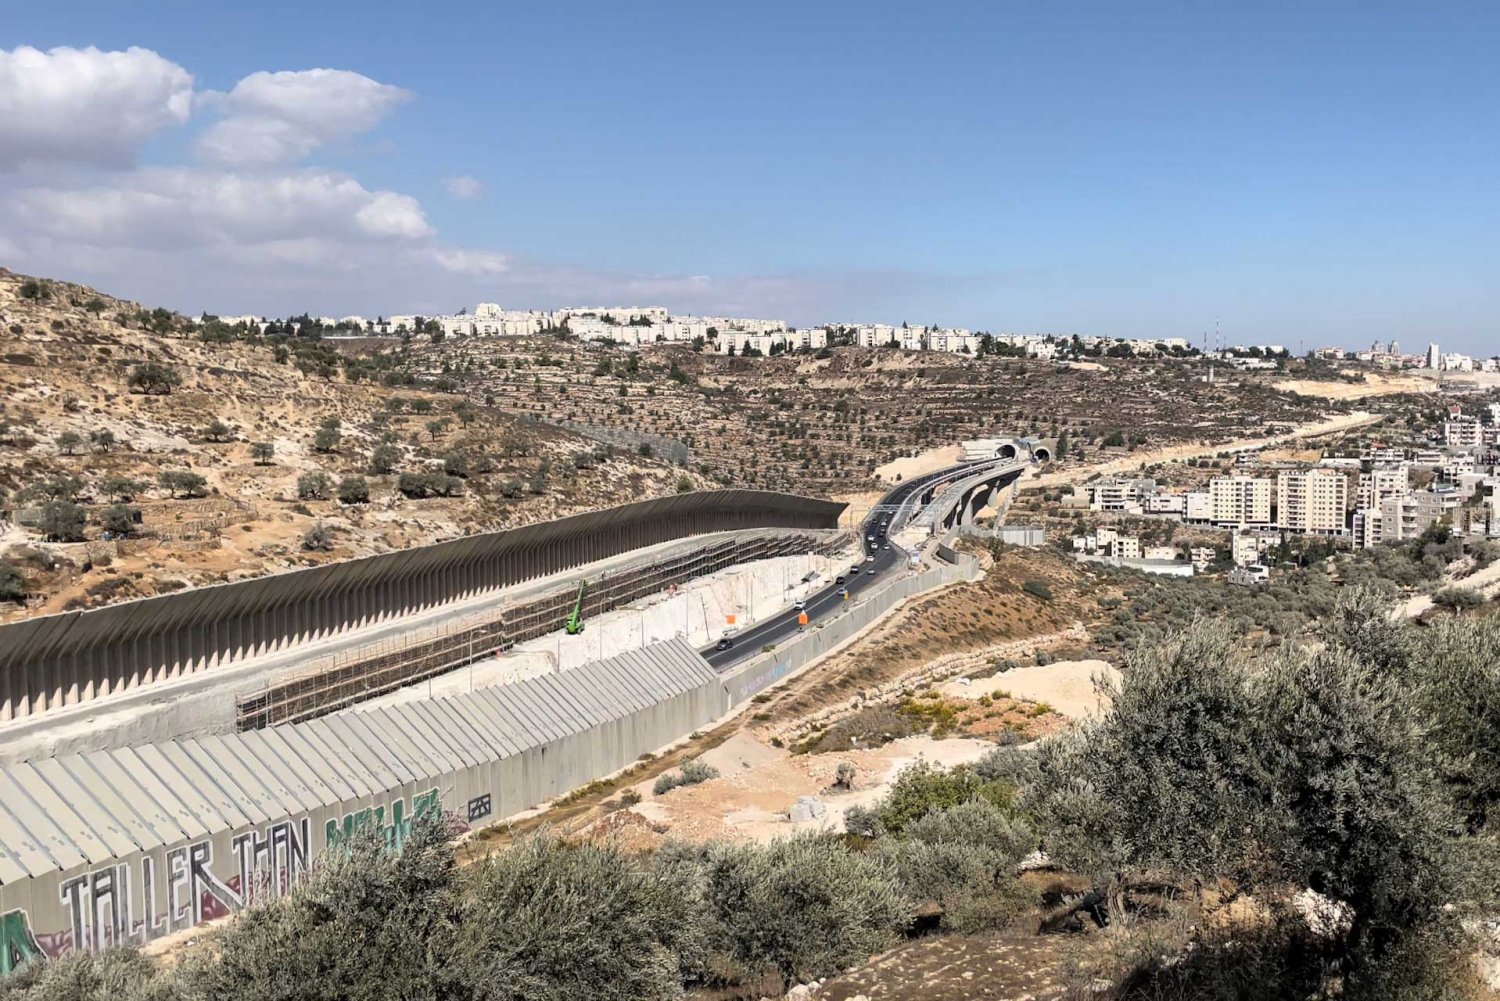 Highway 60 (The Tunnels Road) is an Israeli-only road that connects settlements south of Jerusalem to the city